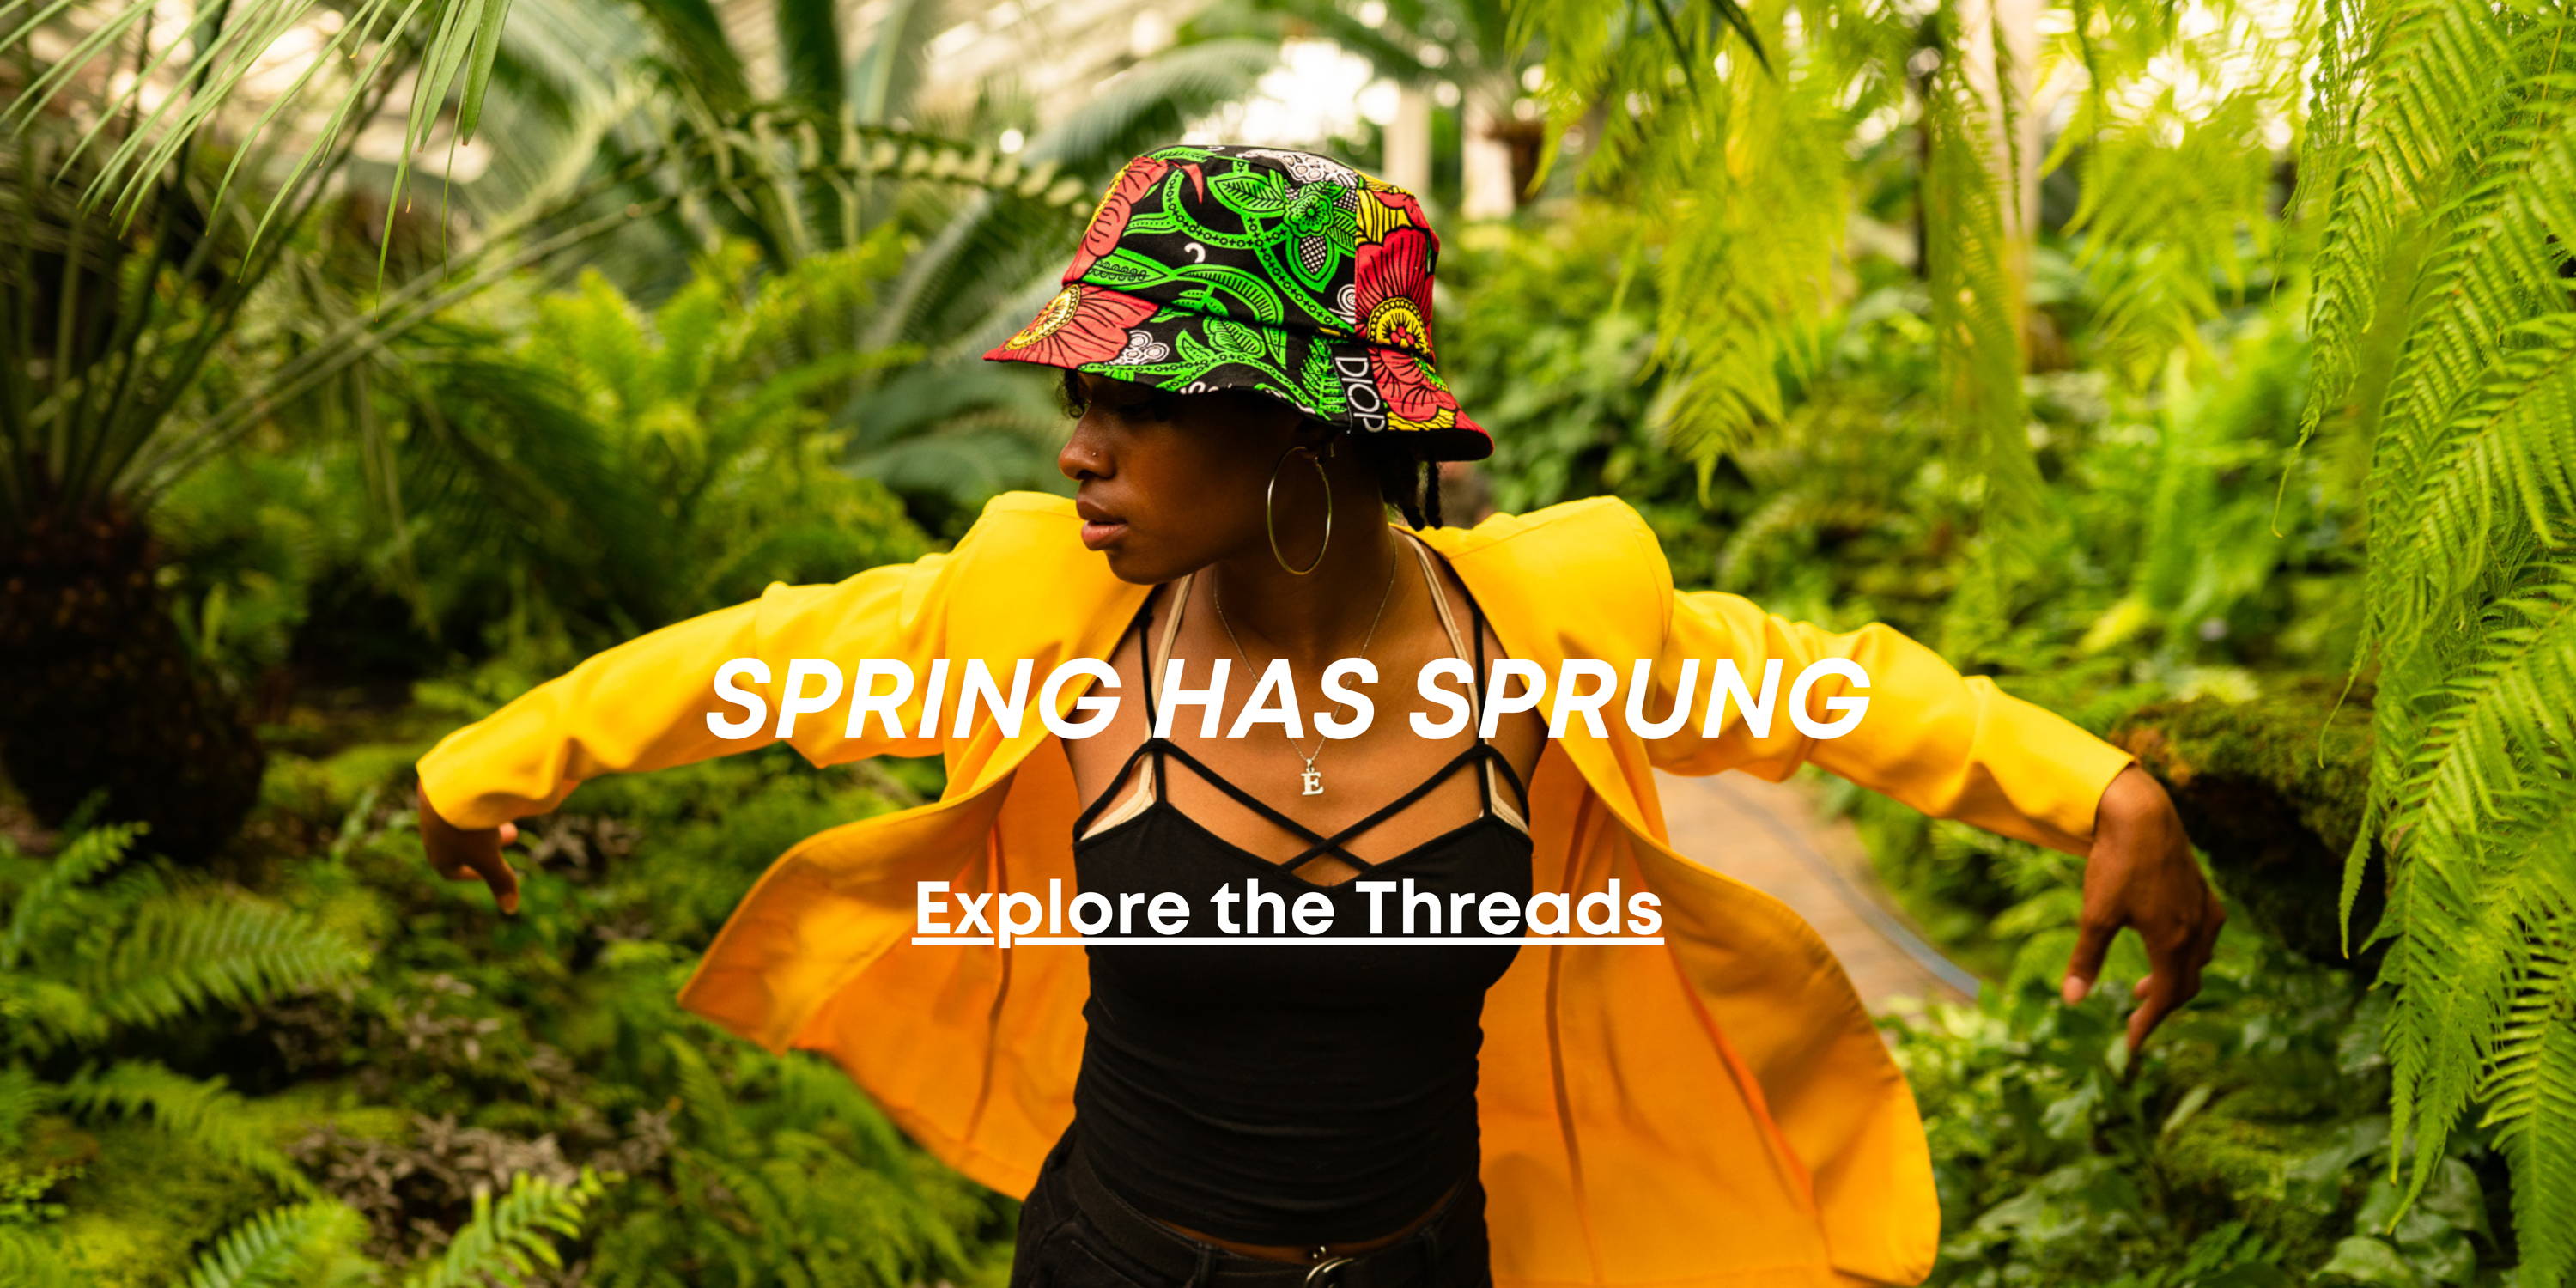 Spring Has Spring at DIOP - Check out the threads!